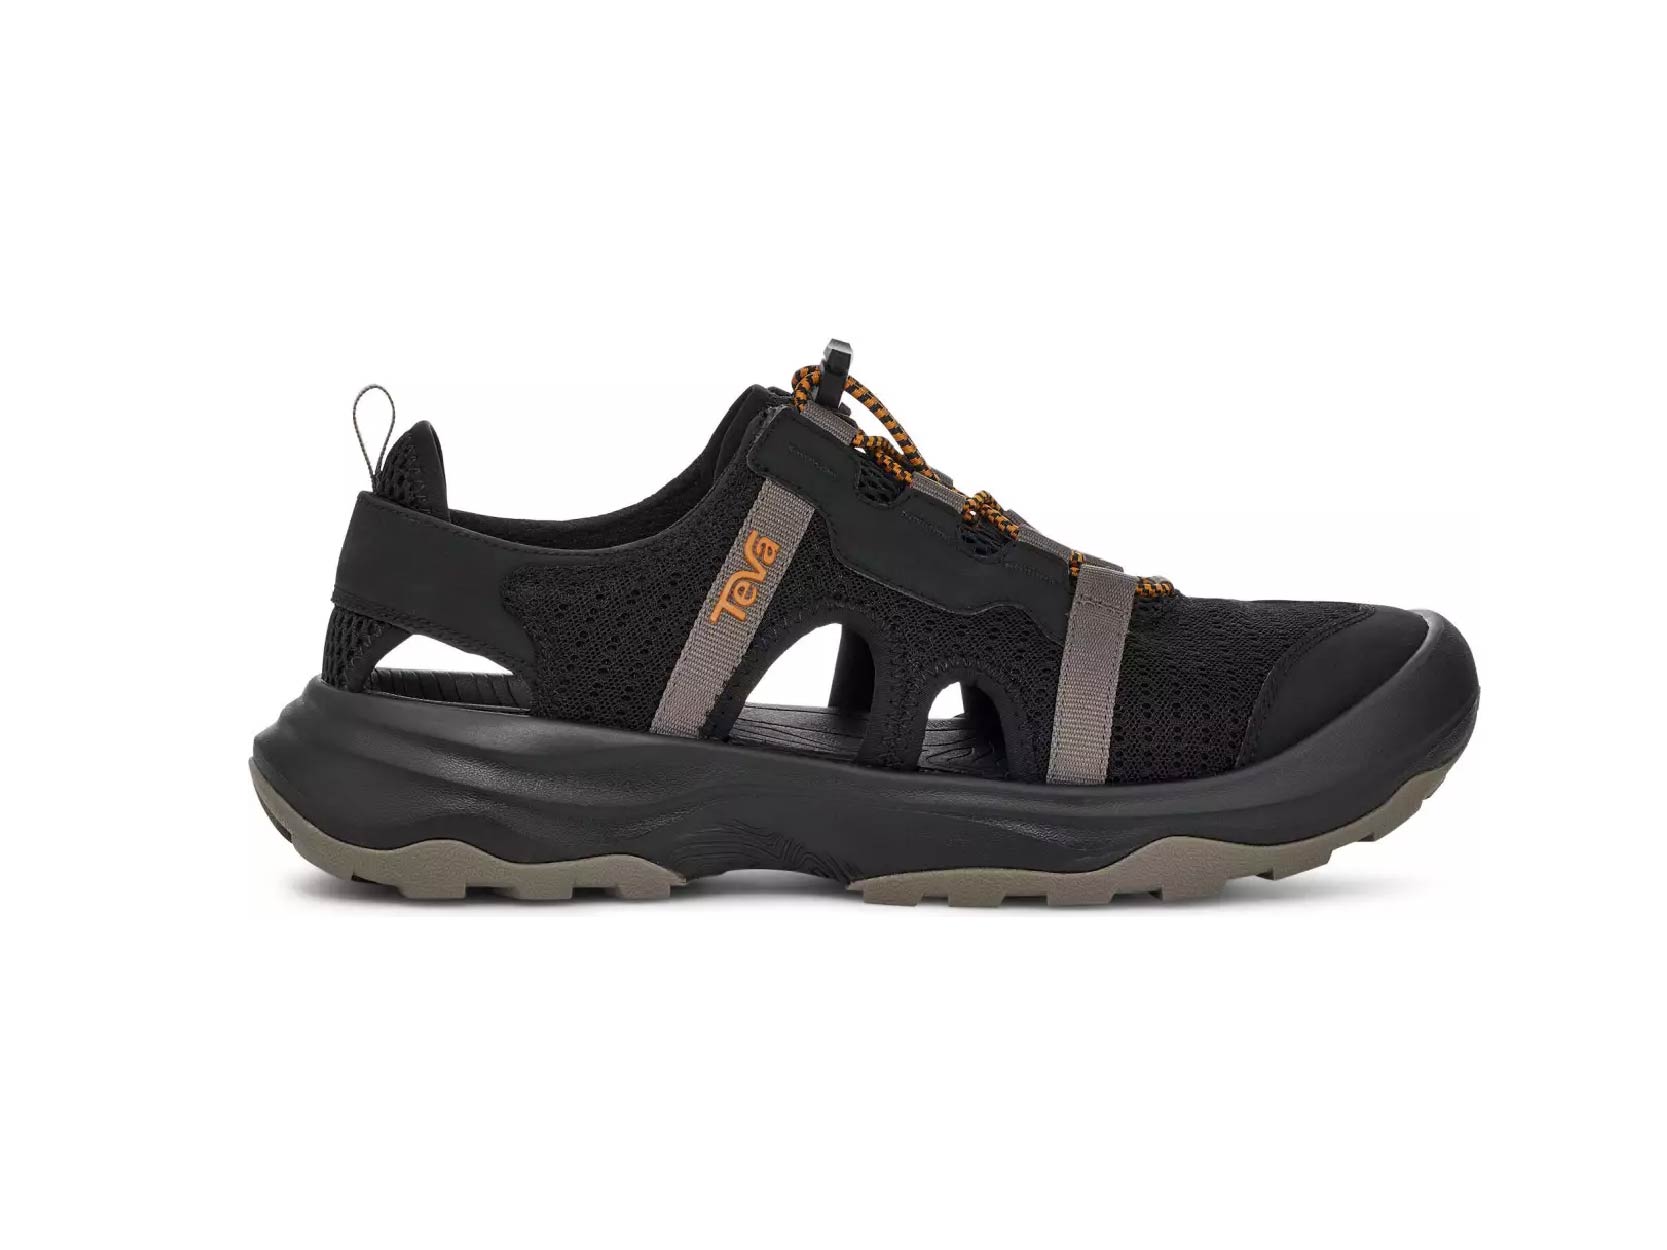 OUTFLOW SANDAL